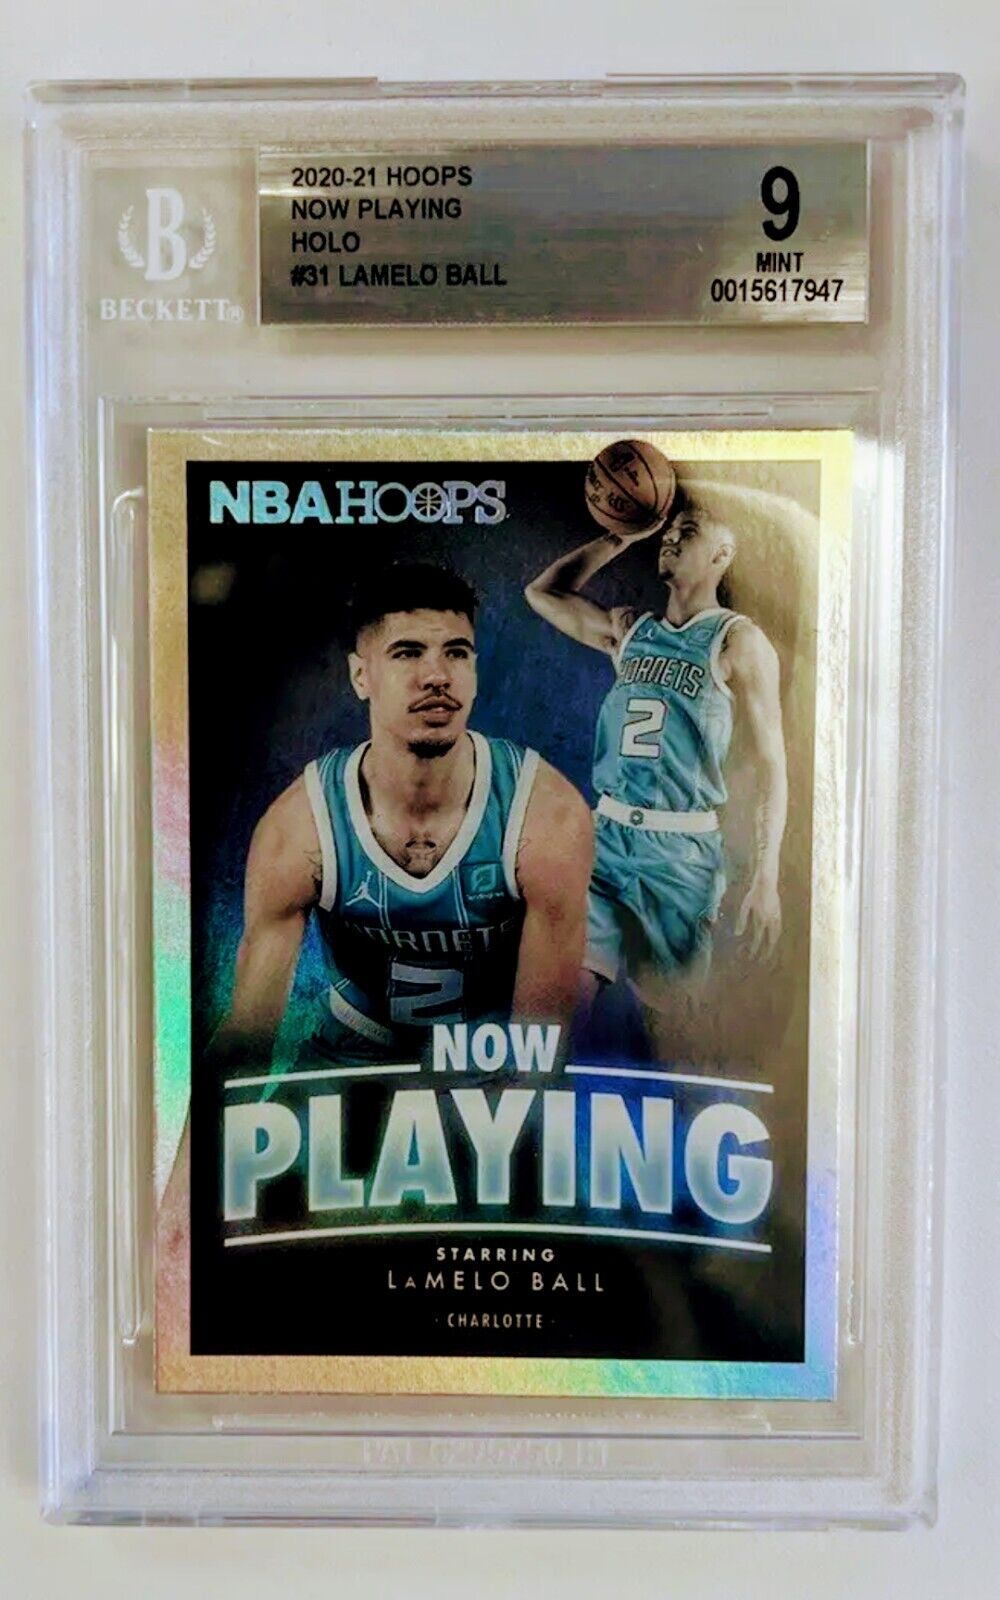 2020-21 NBA HOOPS NOW PLAYING HOLO LAMELO BALL ROOKIE RC #SS-31 BGS 9 MINT